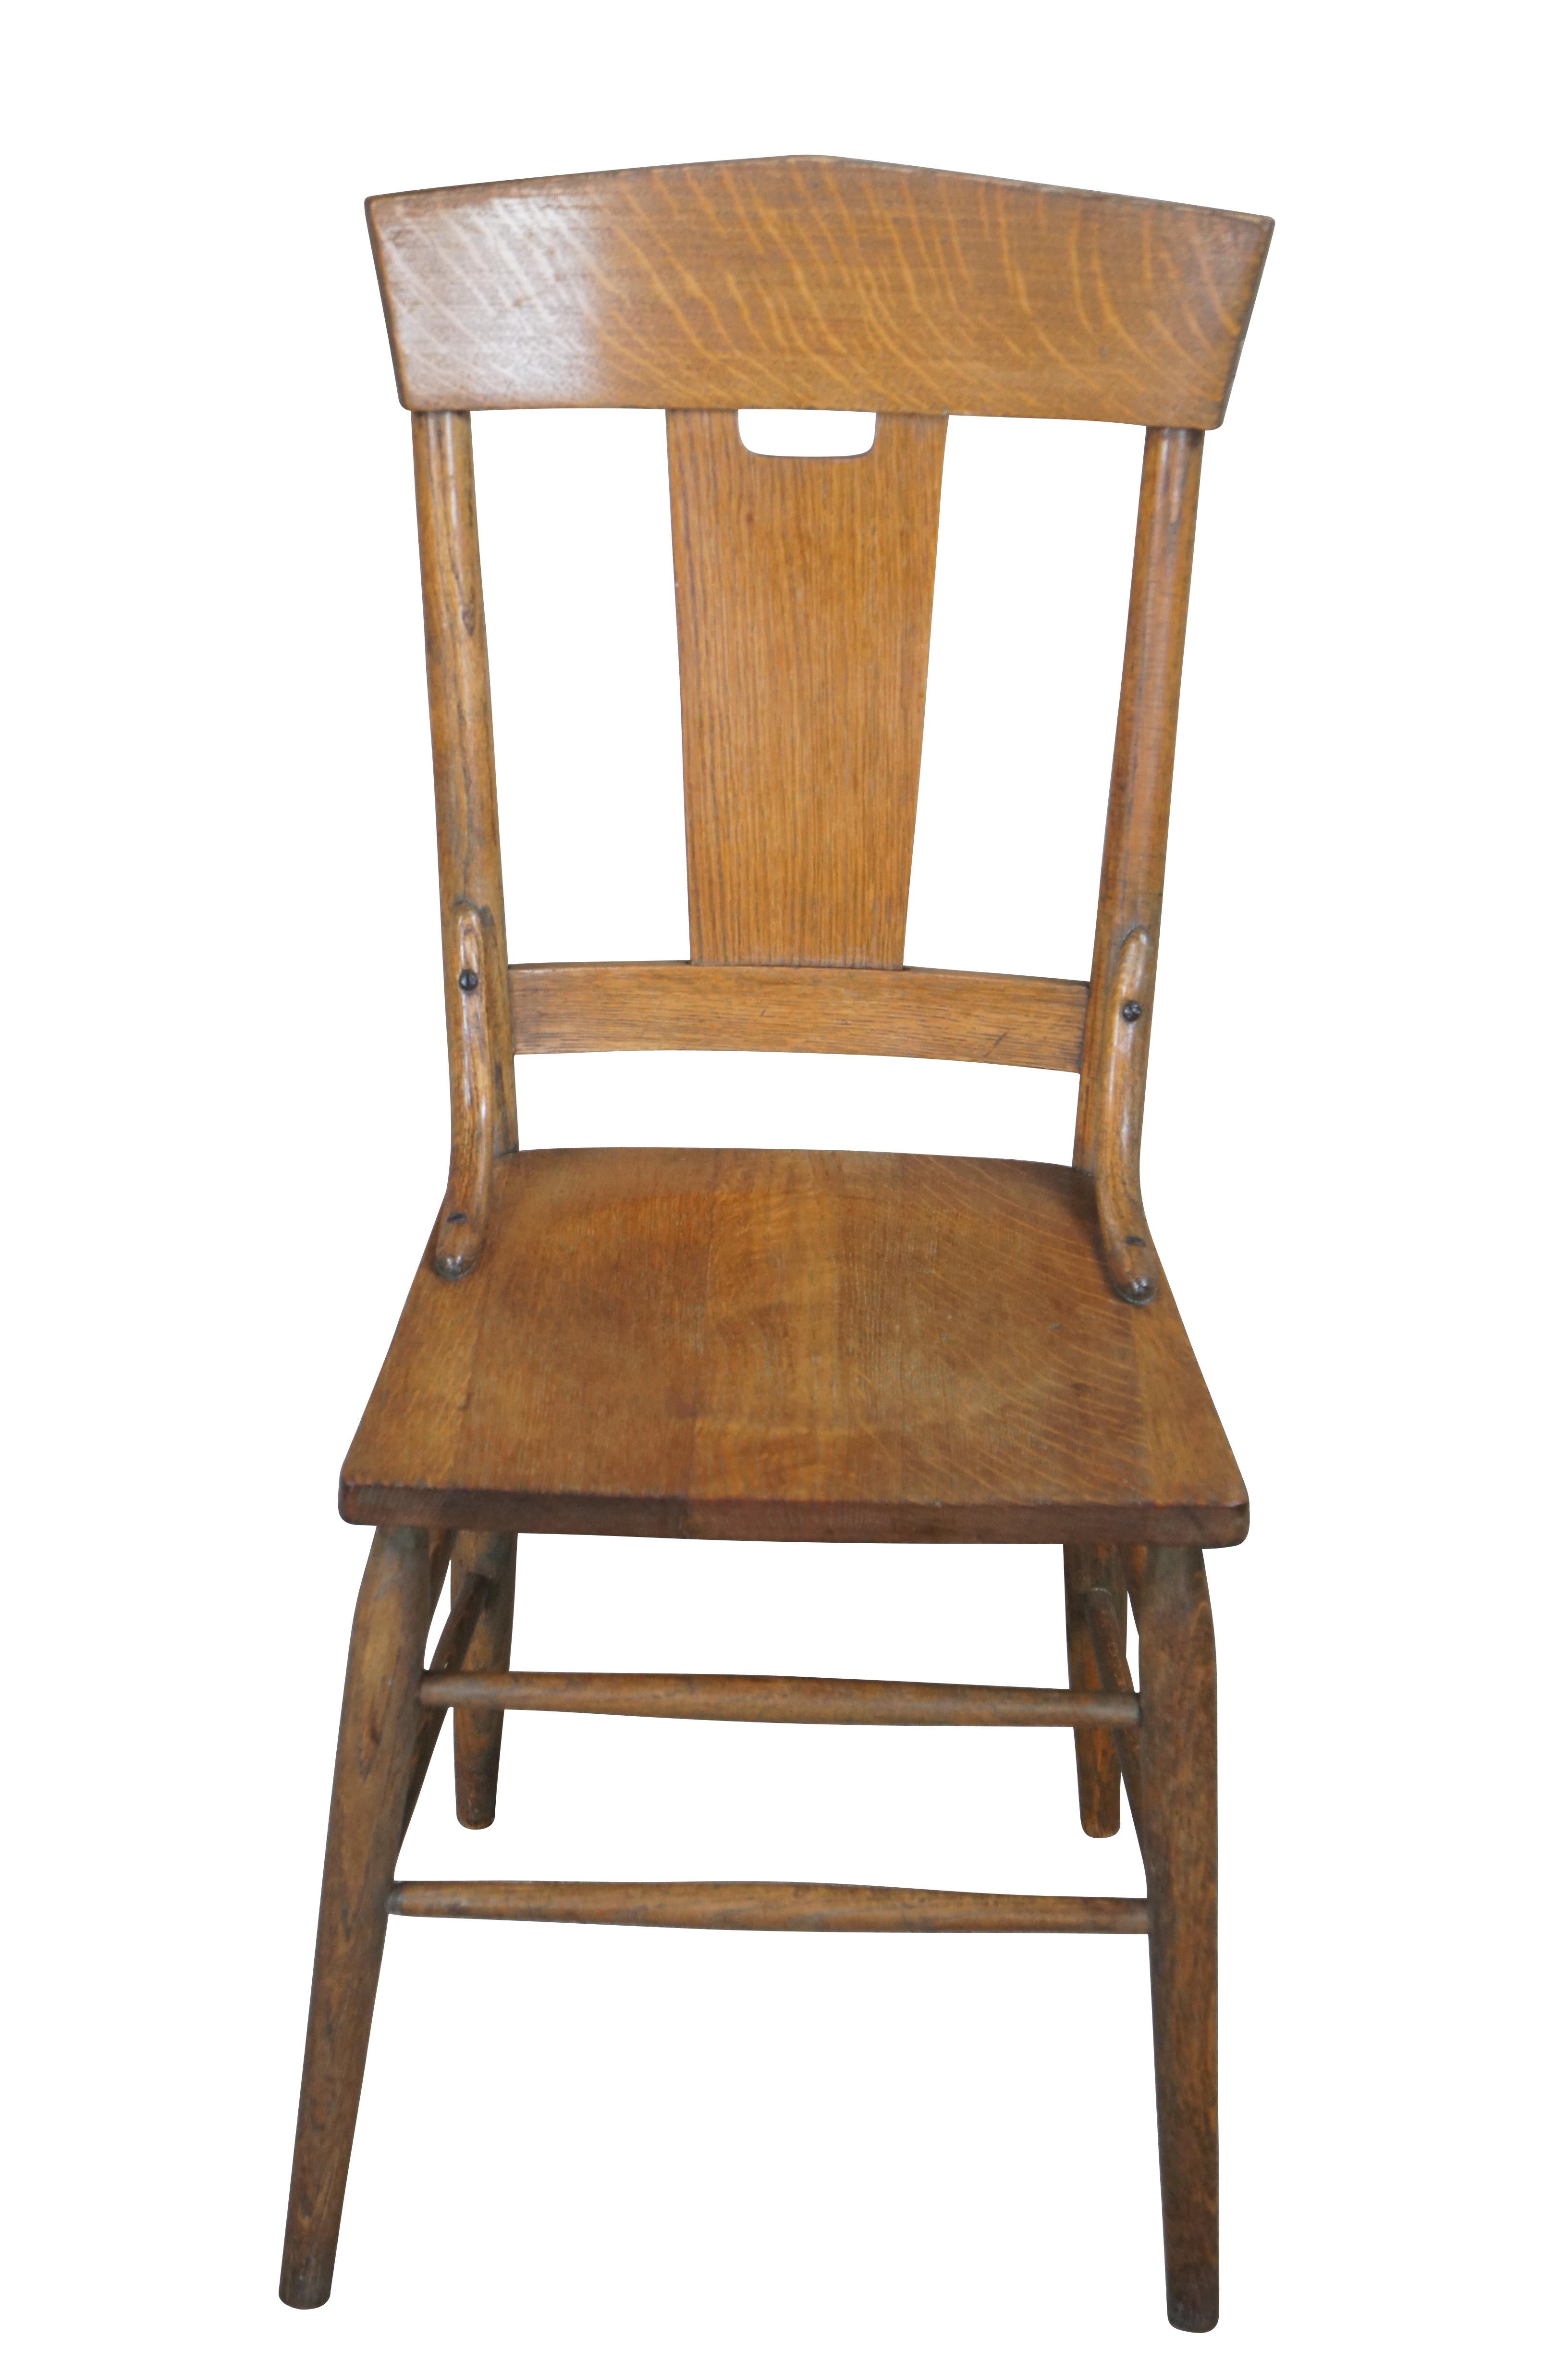 Antique Murphy Chair Company quartersawn oak dining or desk chair featuring slatted back with handle.

At its peak, the Murphy Chair Company Detroit facility produced 123 types of chairs that are still renowned around the world.  

M.J. Murphy was a